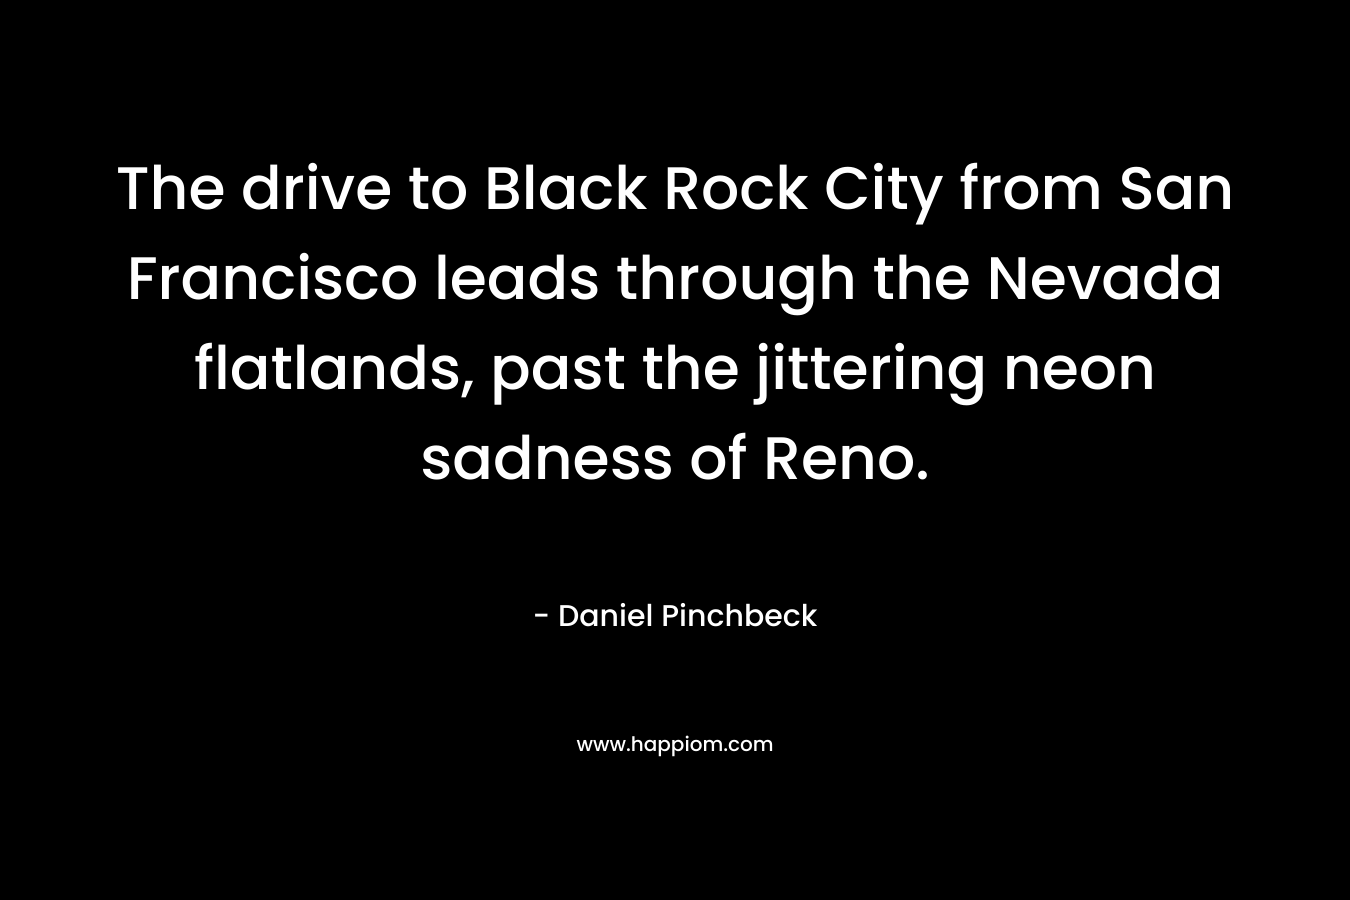 The drive to Black Rock City from San Francisco leads through the Nevada flatlands, past the jittering neon sadness of Reno.